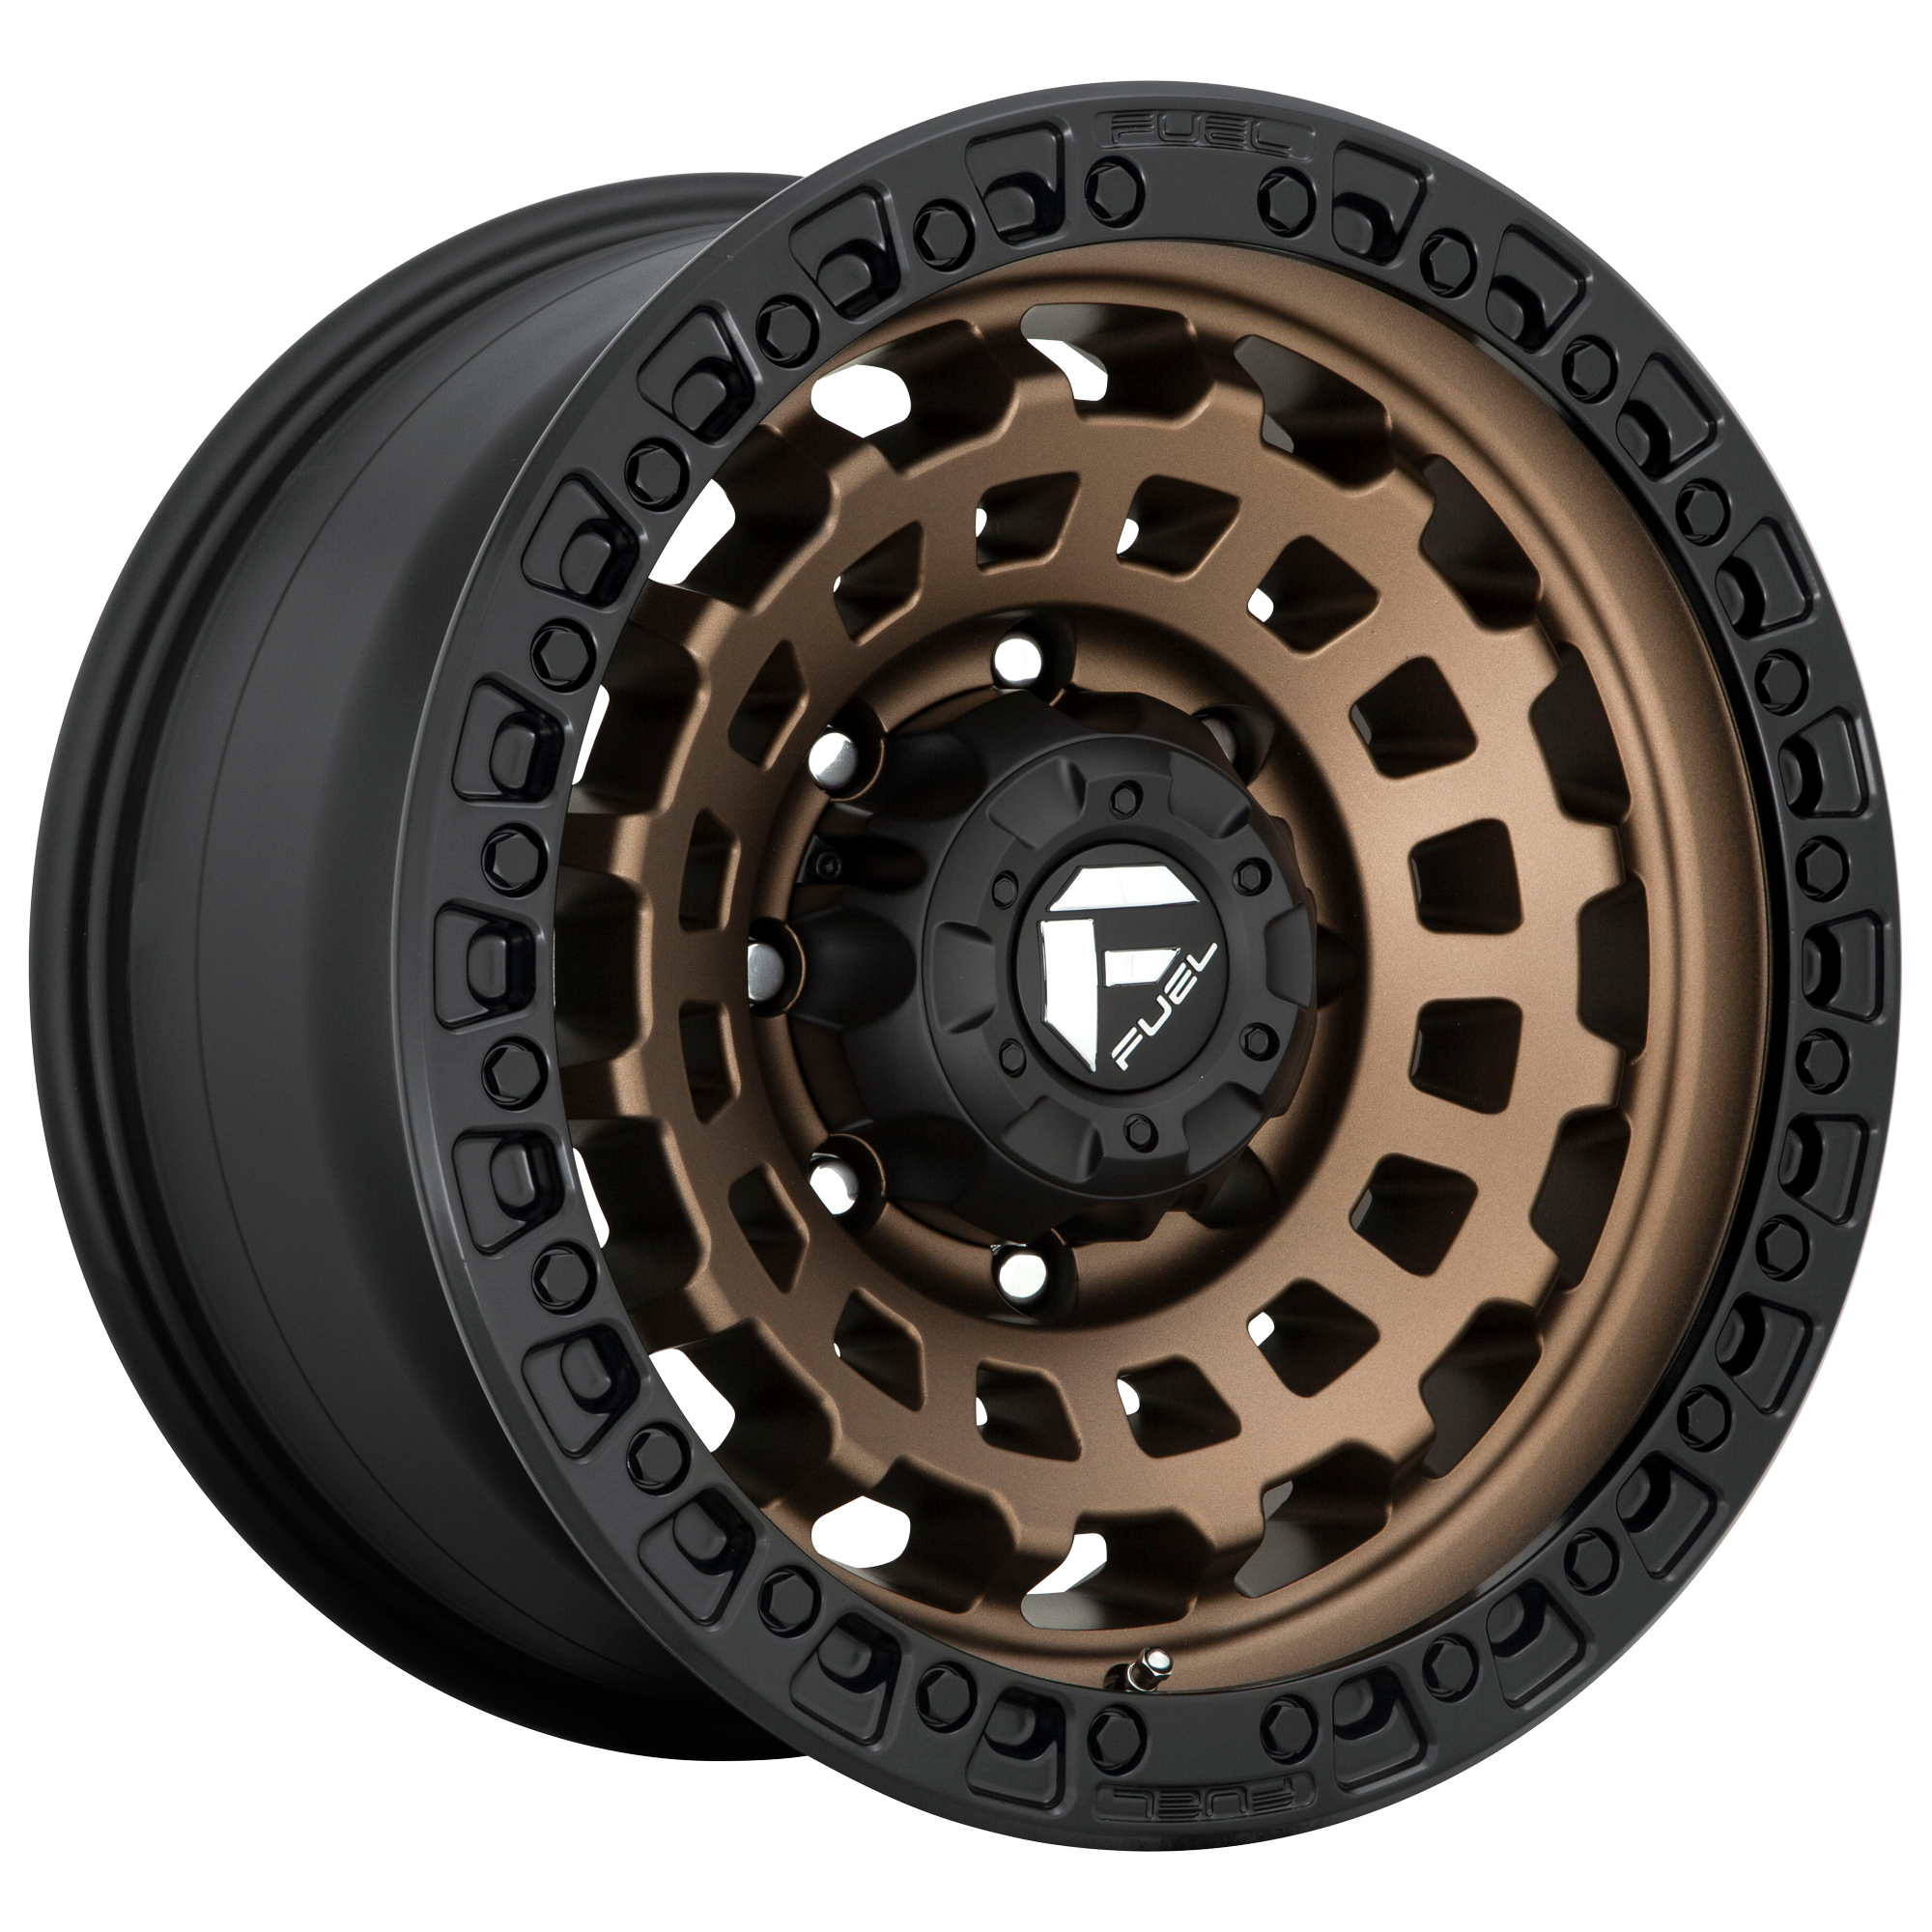 ZEPHYR 18x9 6x139.70 MATTE BRONZE BLACK BEAD RING (1 mm) - Tires and Engine Performance